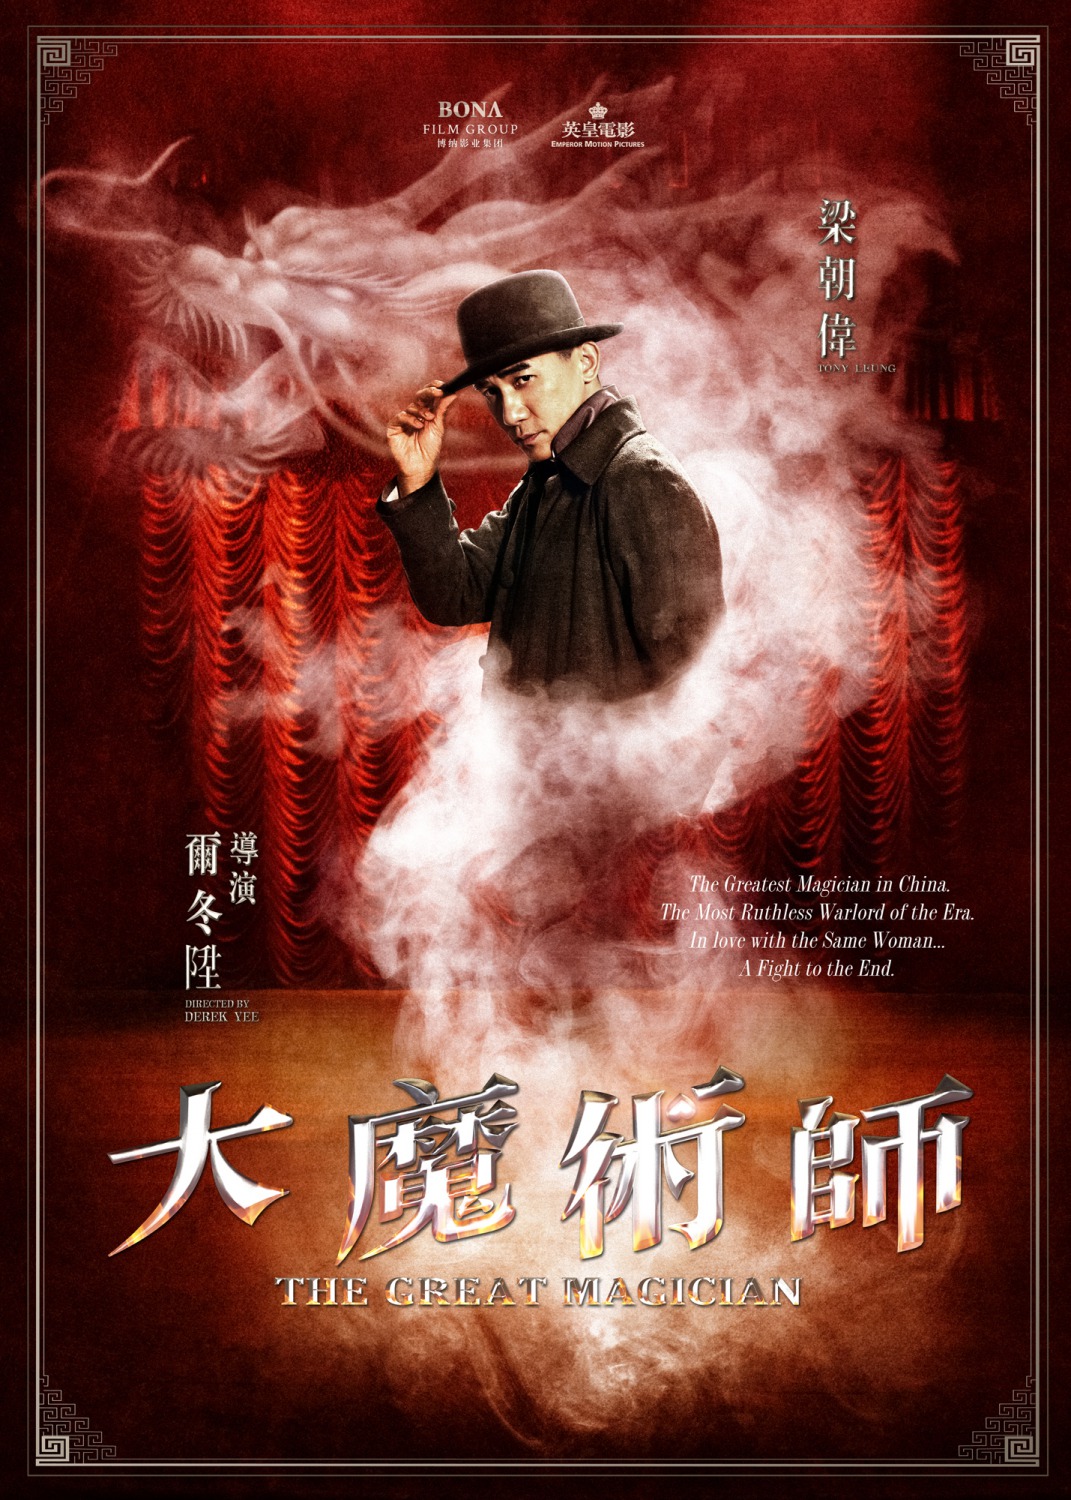 Extra Large Movie Poster Image for Daai mo seut si (#4 of 5)